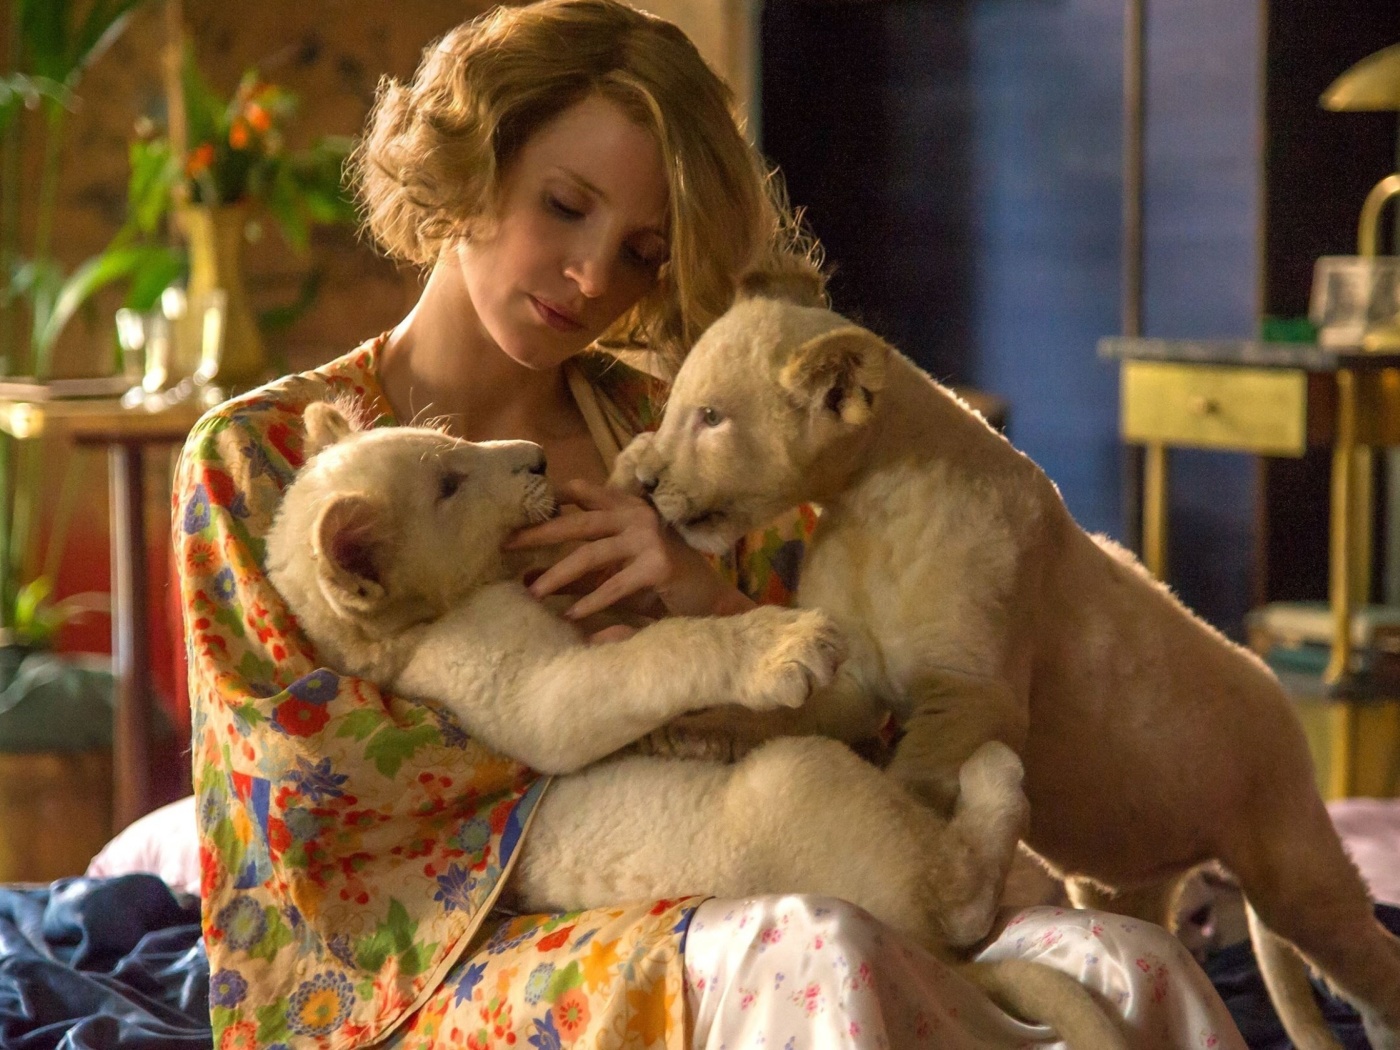 Das The Zookeepers Wife Film with Jessica Chastain Wallpaper 1400x1050